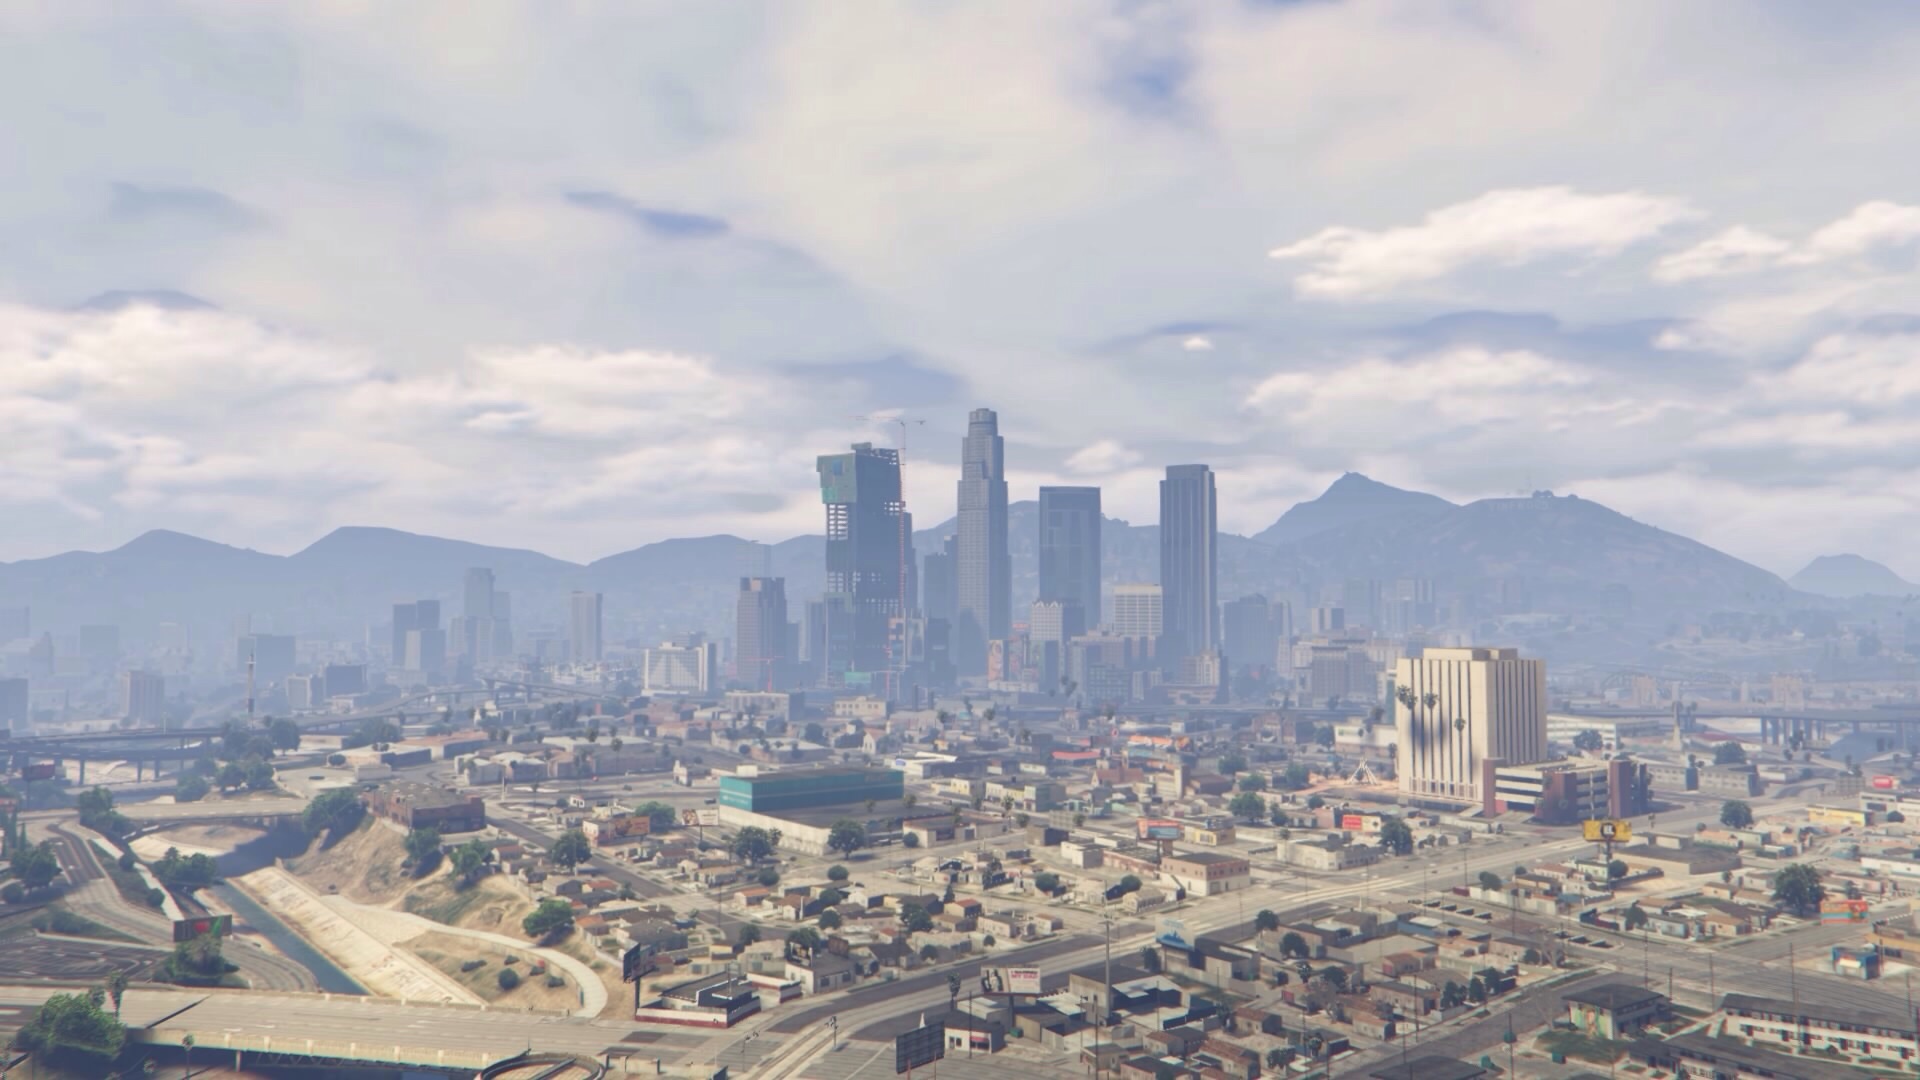 Where is Downtown Los Santos located In GTA 5?